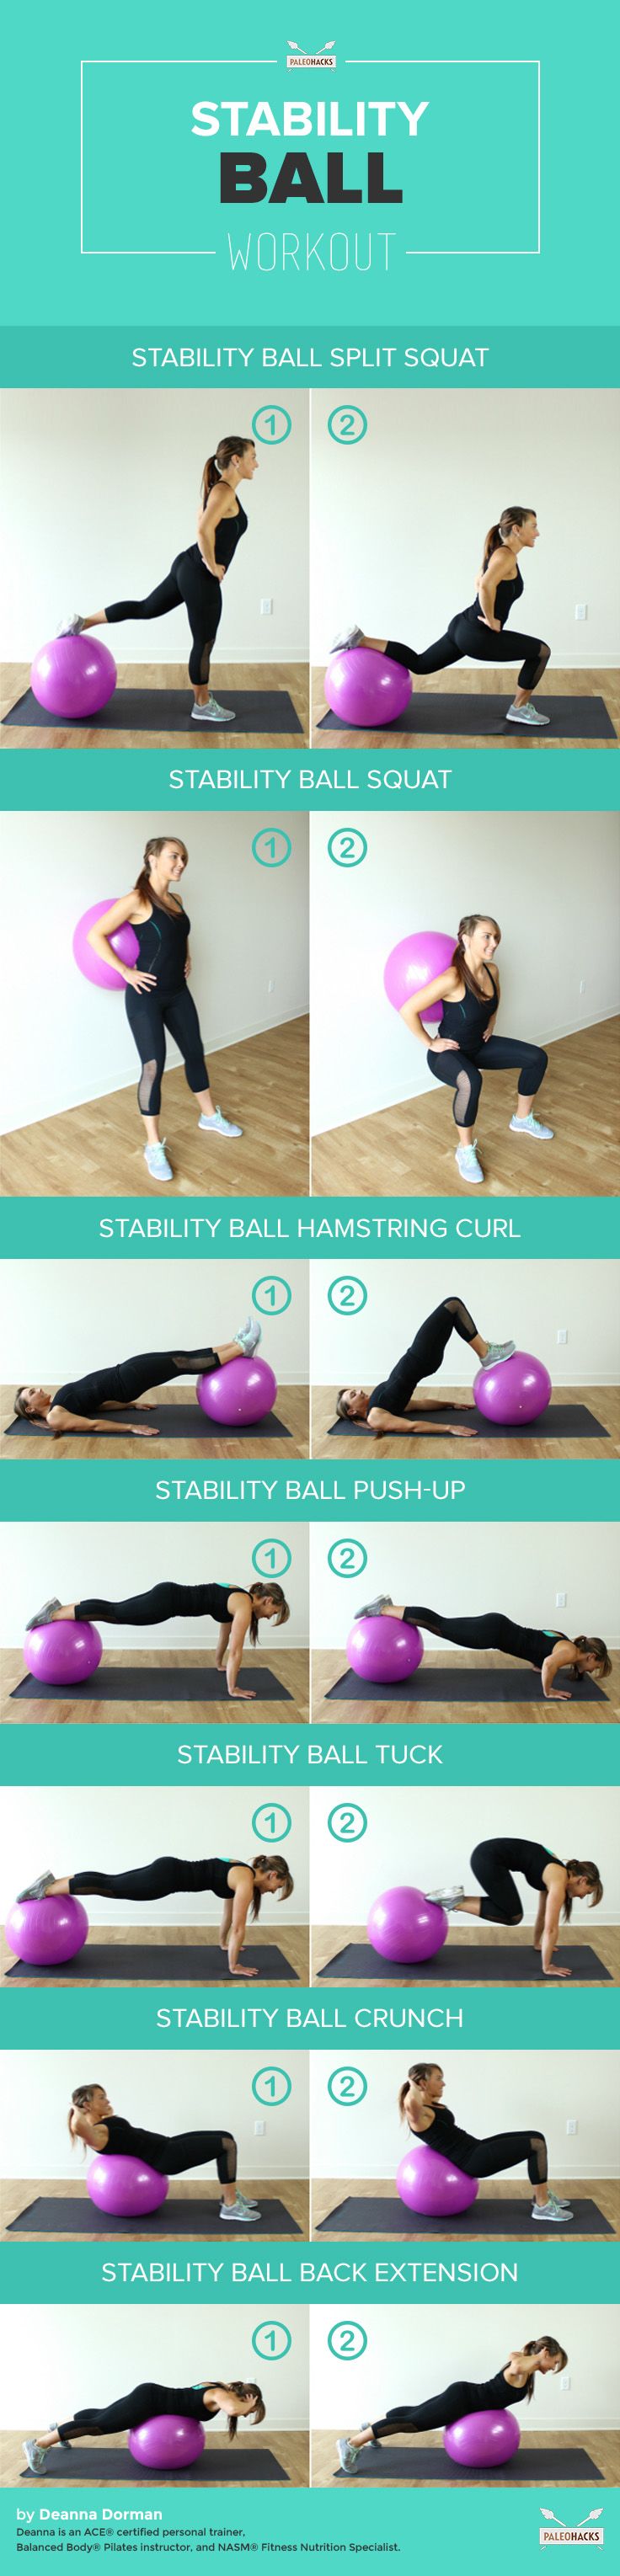 Full Stability Ball Workouts